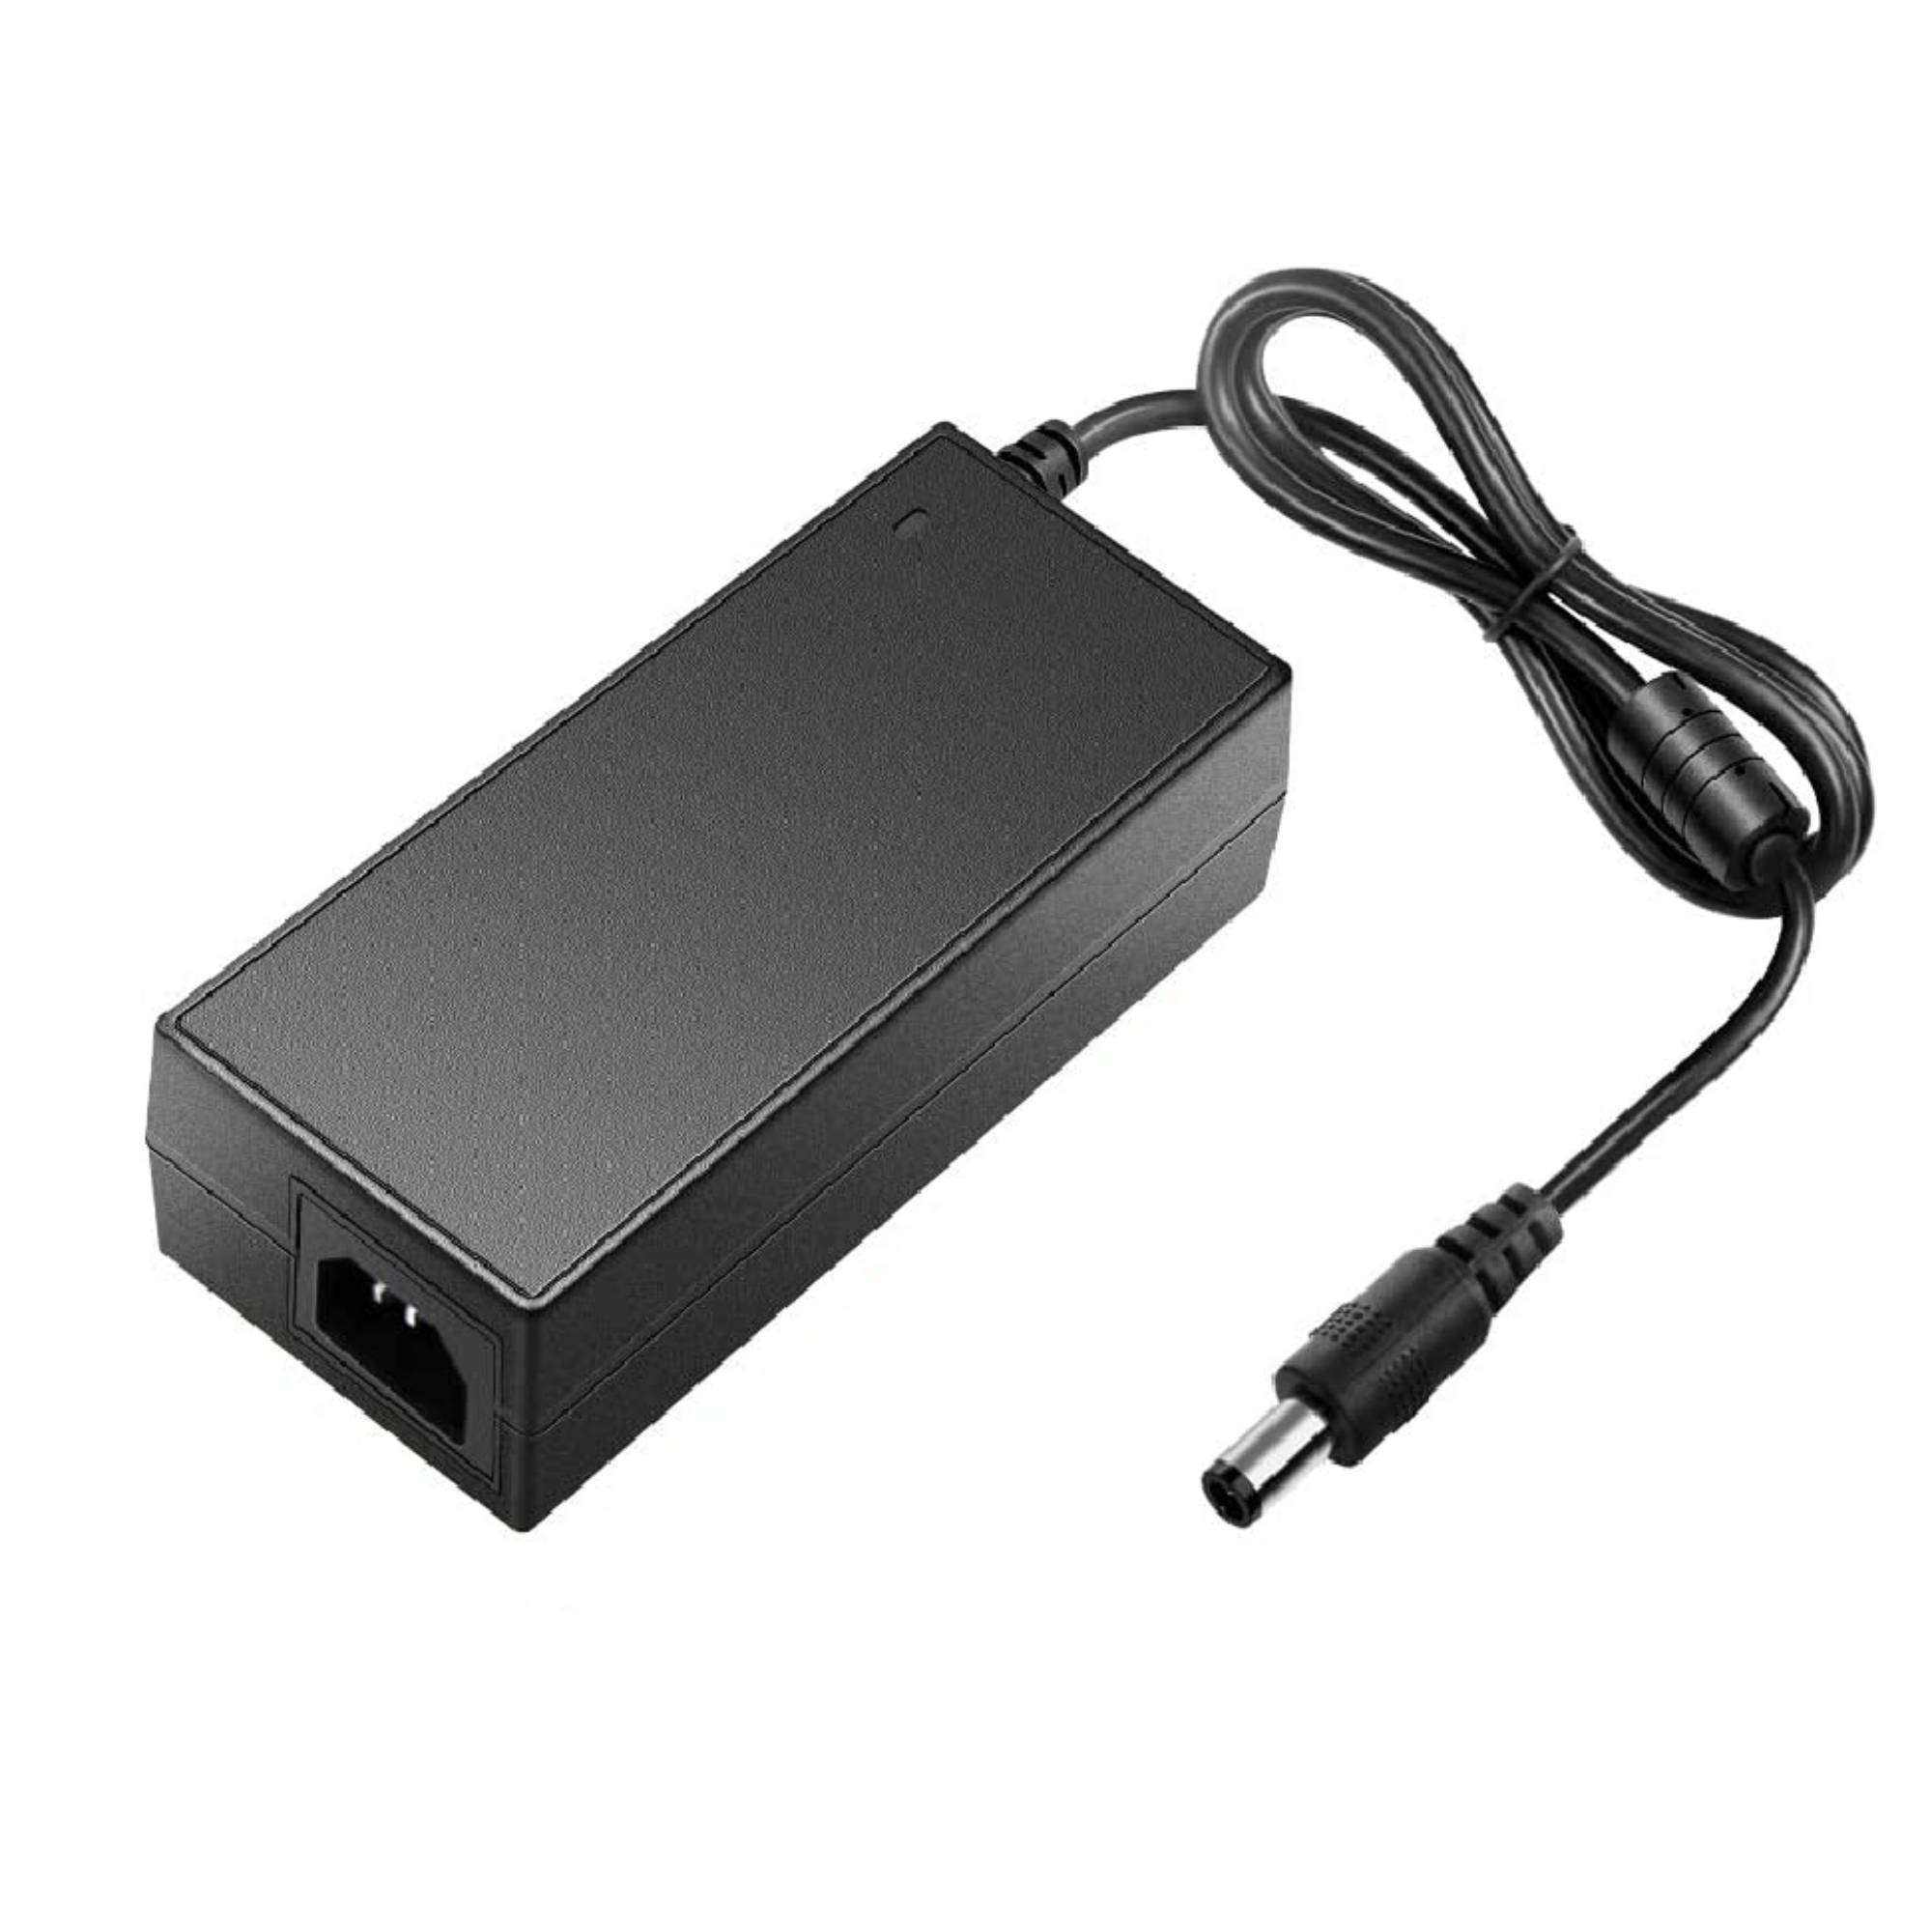 Omilik AC Adapter replacement compatible with JBL XTREMEBLKUS JBL XTREME2BLKAM JBL XTREME2BLUAM JBL XTREME2GRNAM JBL BY HARMAN P/N: NSA60ED-190300 KCC-REM-JQH-NSA60ED-190300 NSA60ED190300 - image 2 of 3